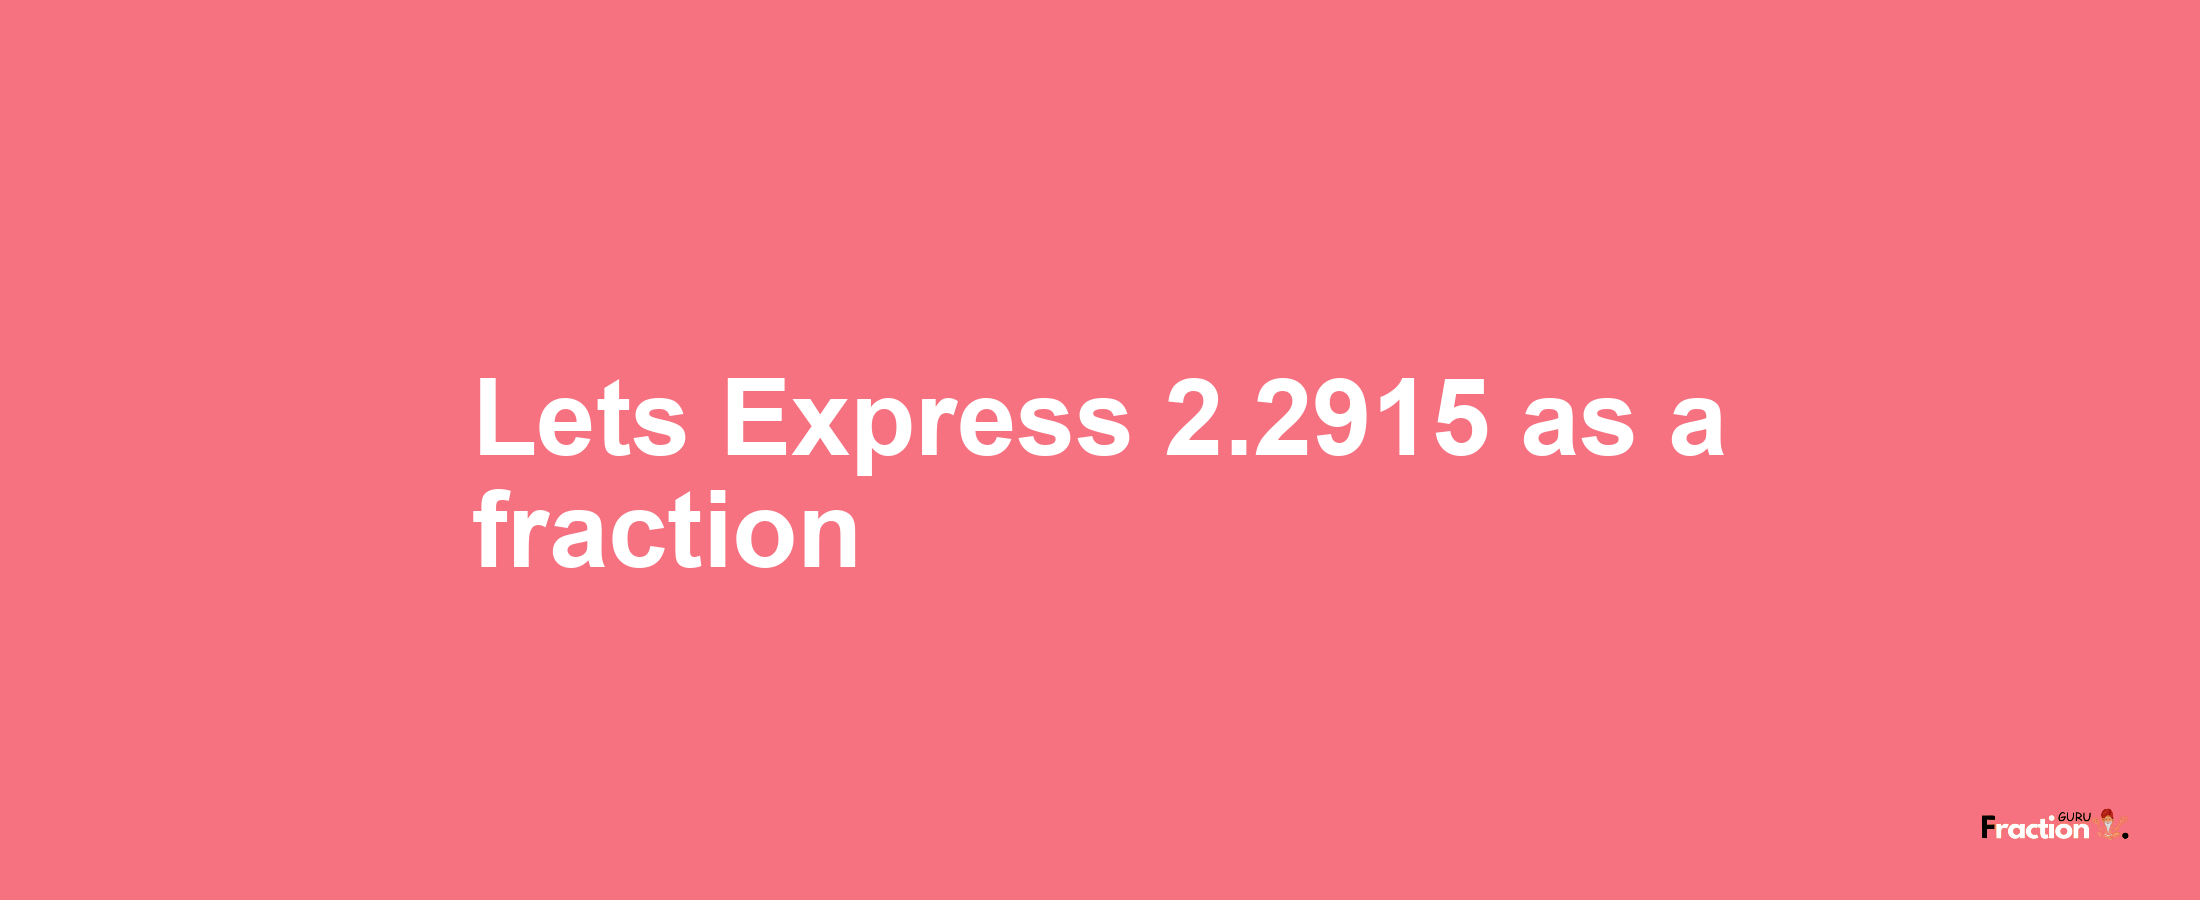 Lets Express 2.2915 as afraction